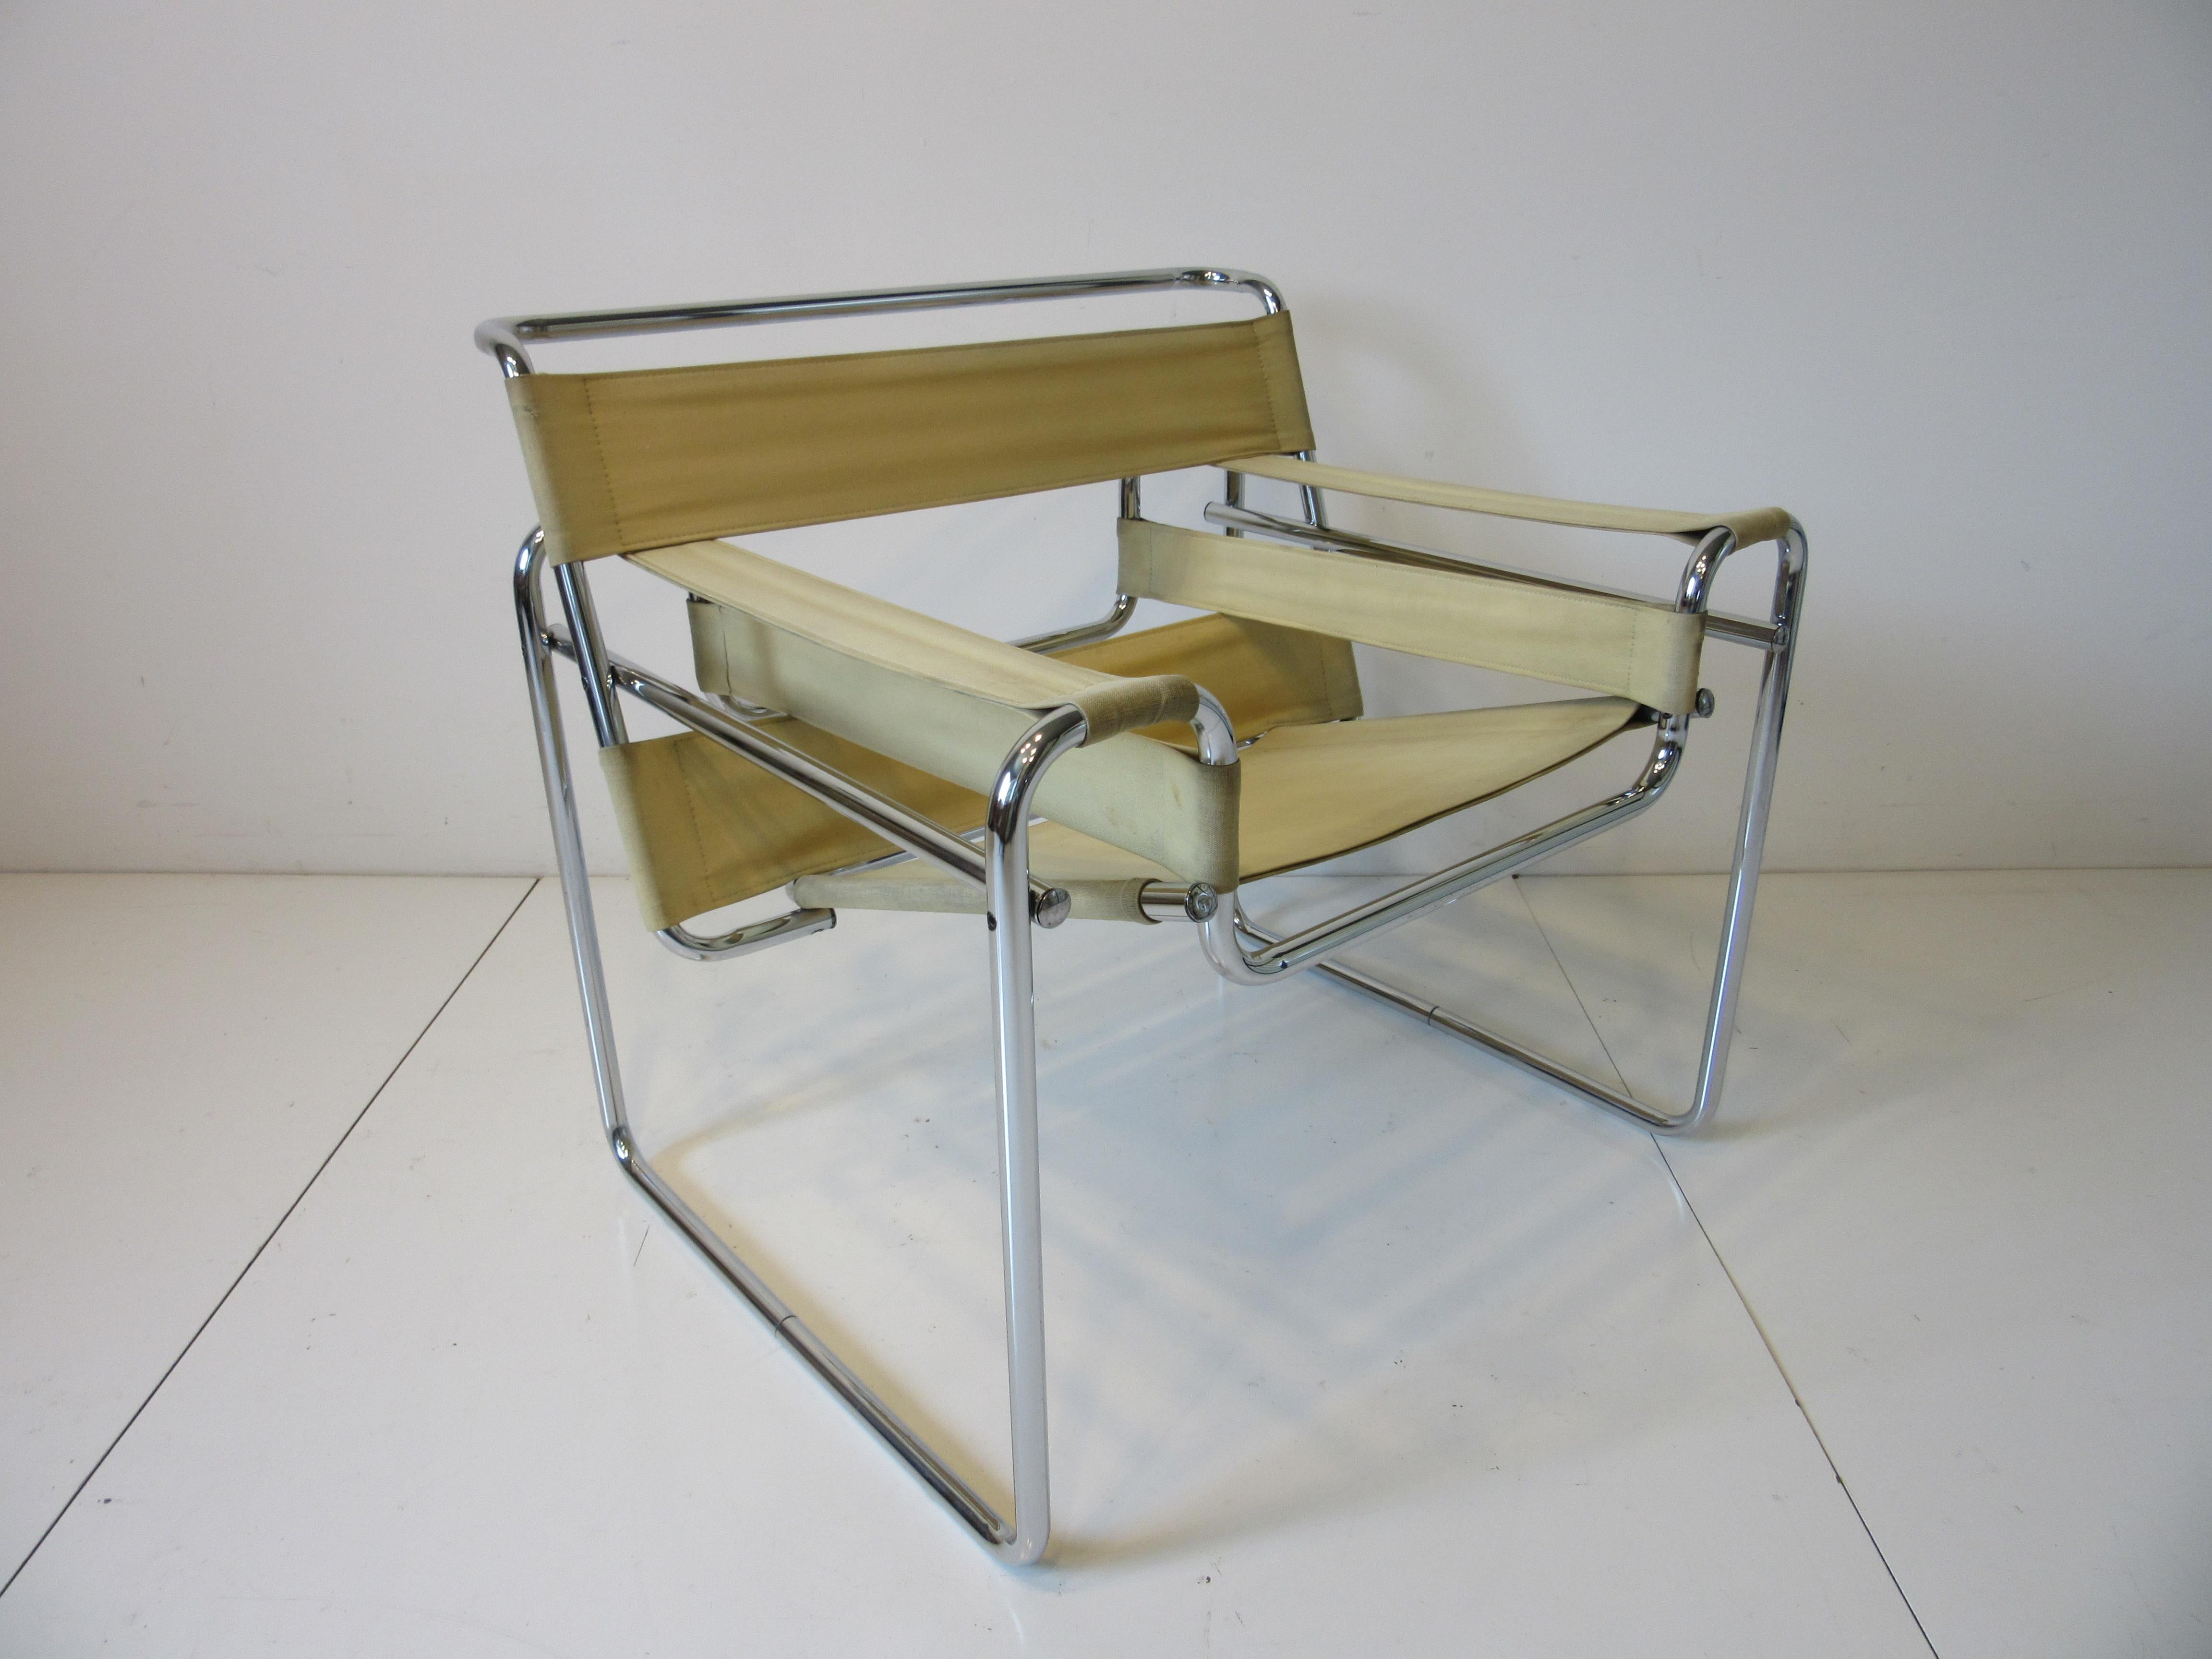 A hard to find canvas slung Wassily lounge chair with sculptural steel chromed frame by Marcel Breuer finished in a yellowish canvas material. Model # B3 designed in the late 1930's this iconic chair is still as fresh then as it is today.